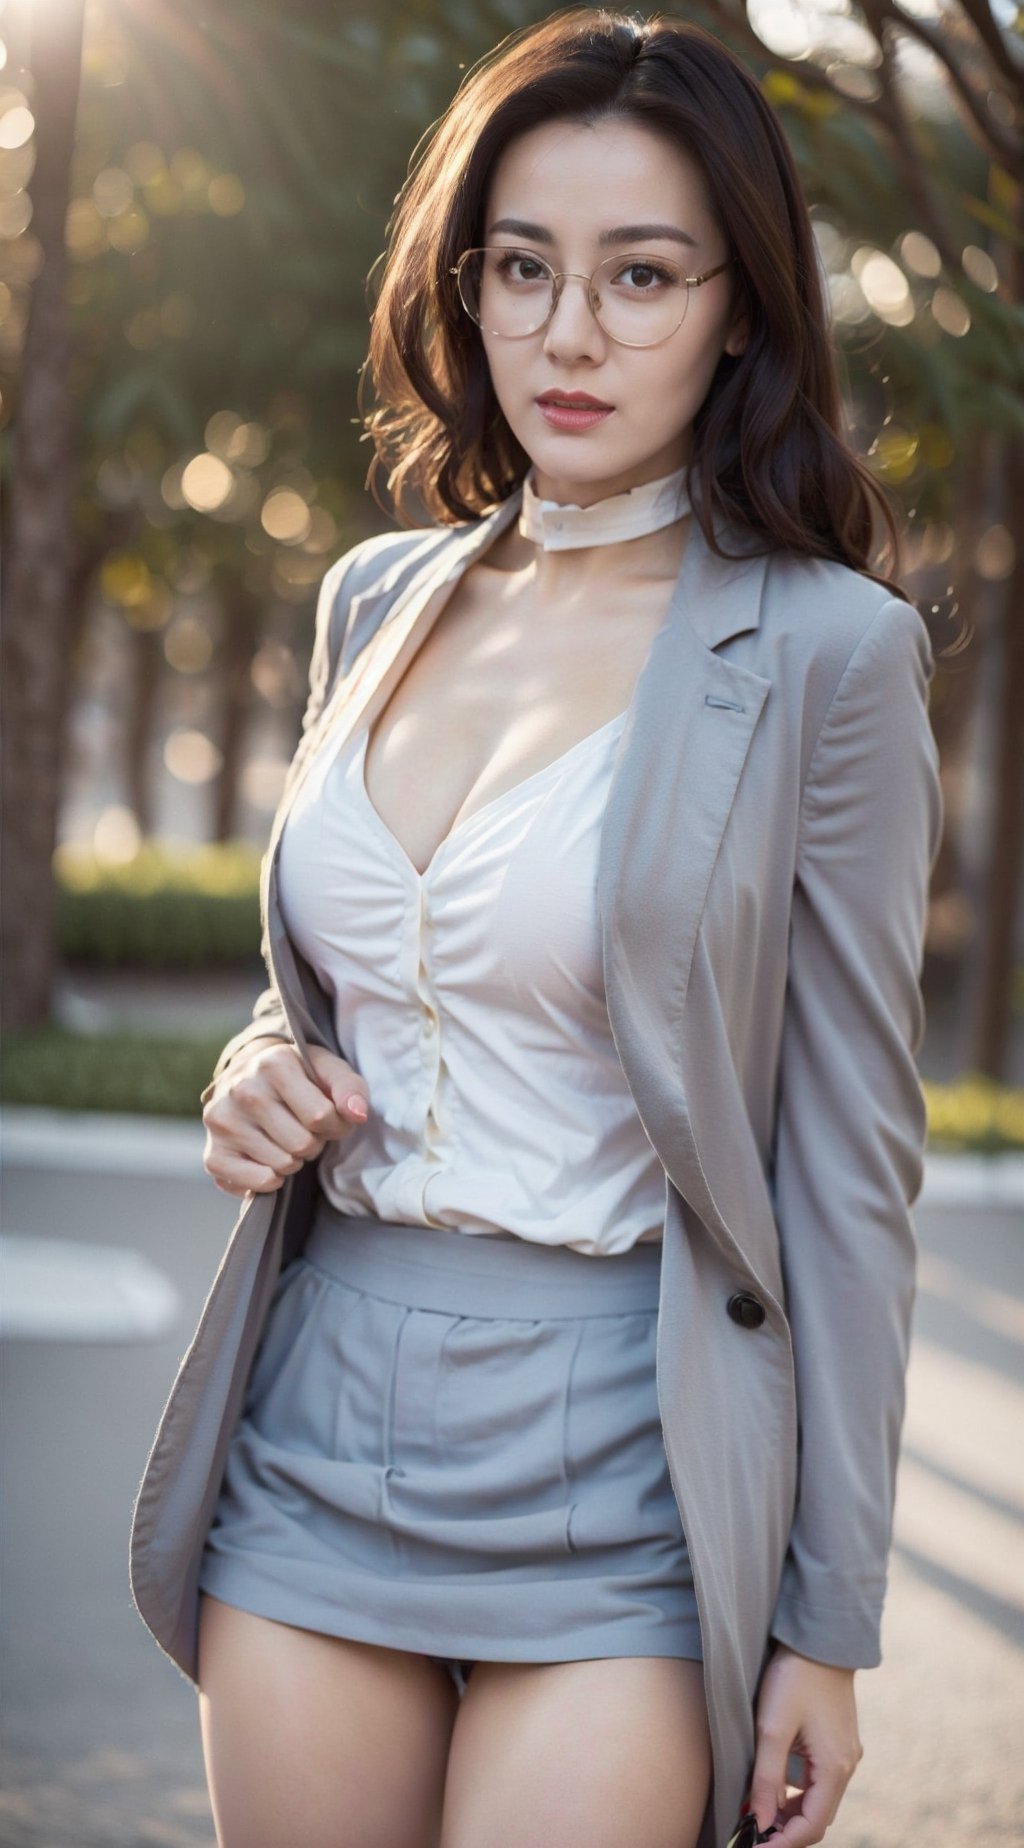 Masterpiece,best quality,official art asian,teen, long brunette curly hair, sky blue formal suit, ,choker,glasses dynamic lighting,Portrait,dream_girl,Photorealism, dynamic pose,flash, sexy pose, 